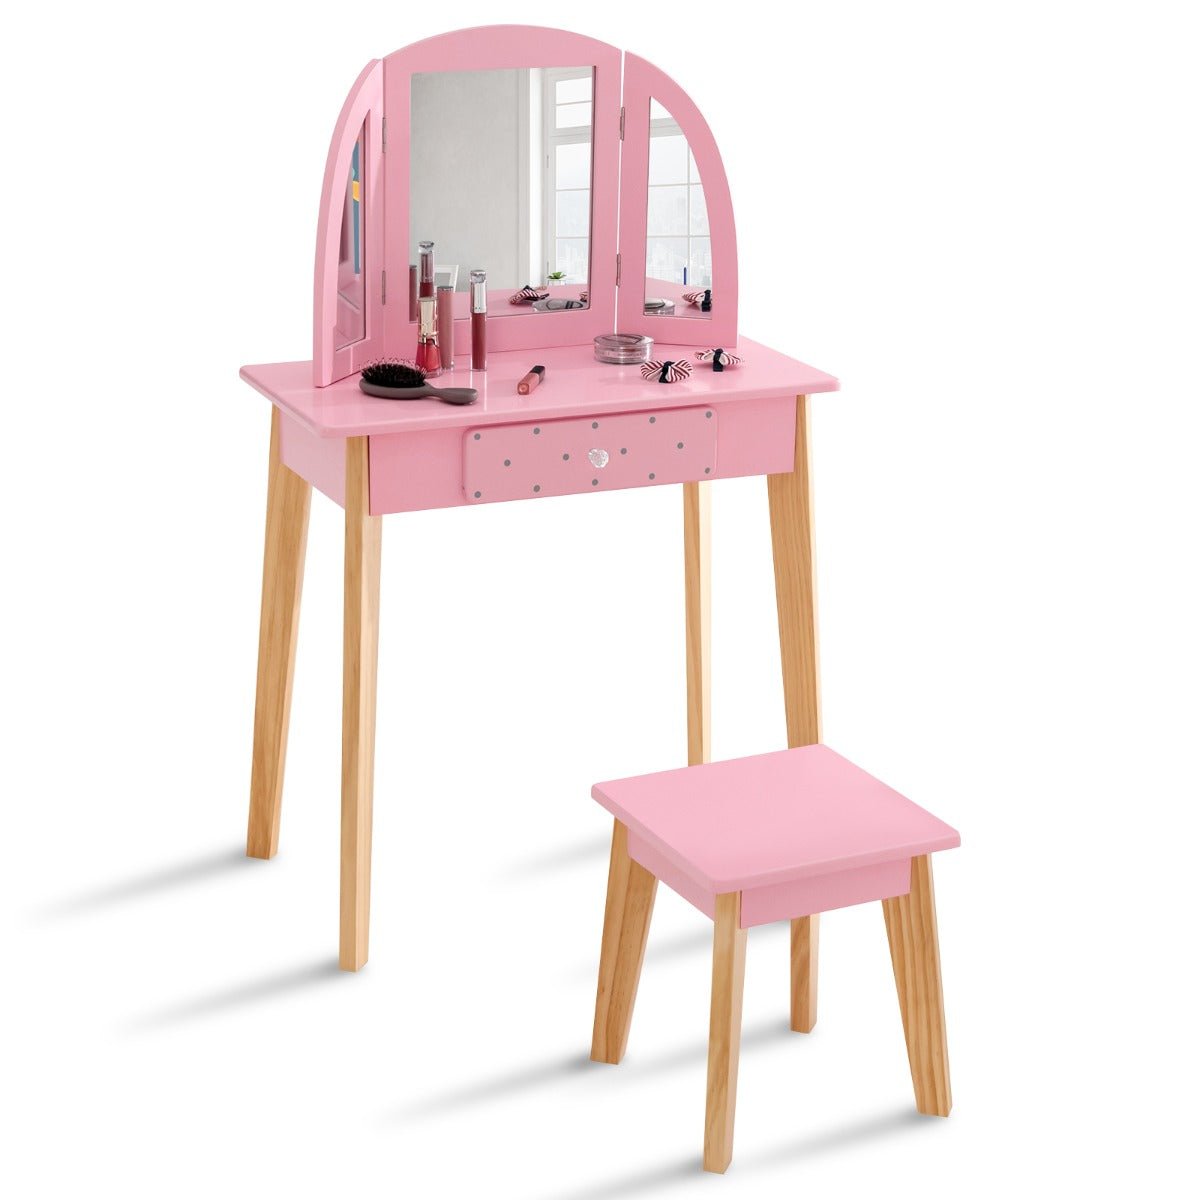 Girls' 2-in-1 Vanity Set with Tri-fold Mirror - Pink Delight and Wonder